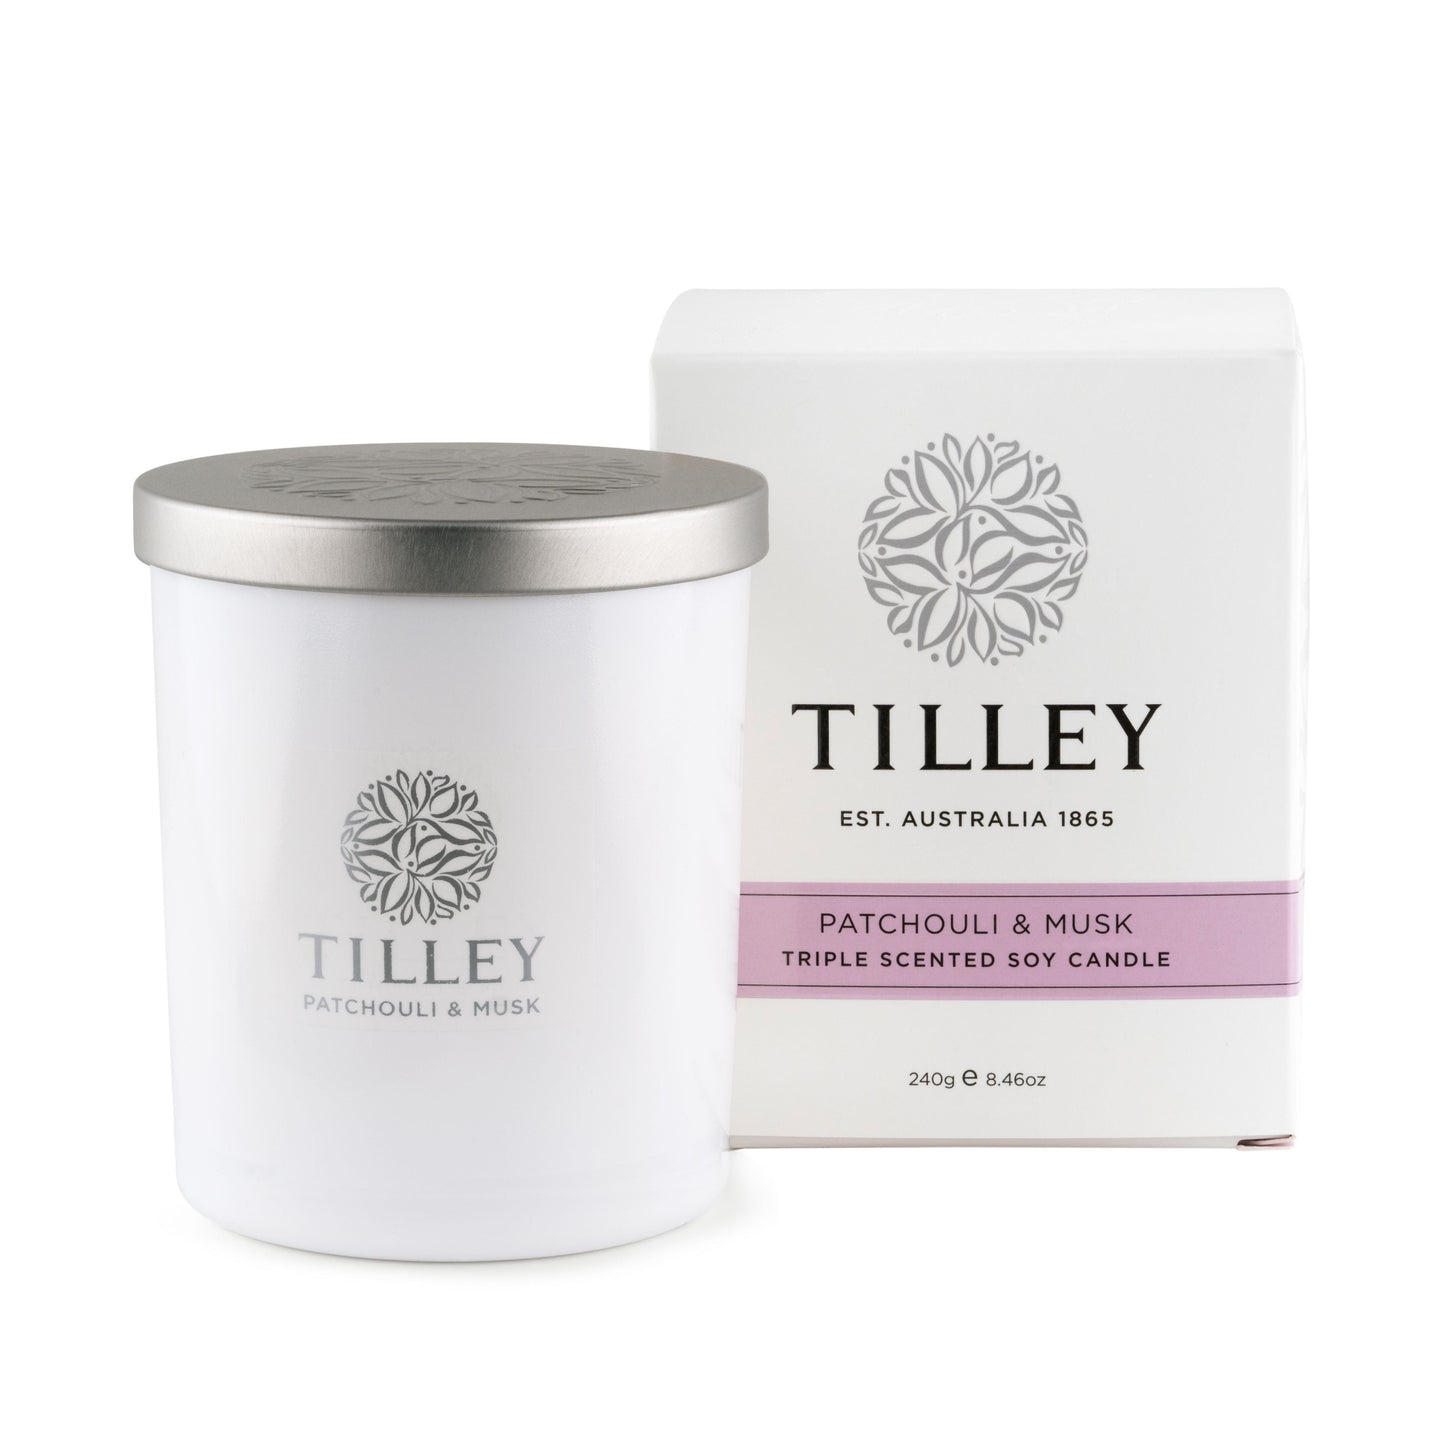 Tilley Patchouli & Musk Soy Candle